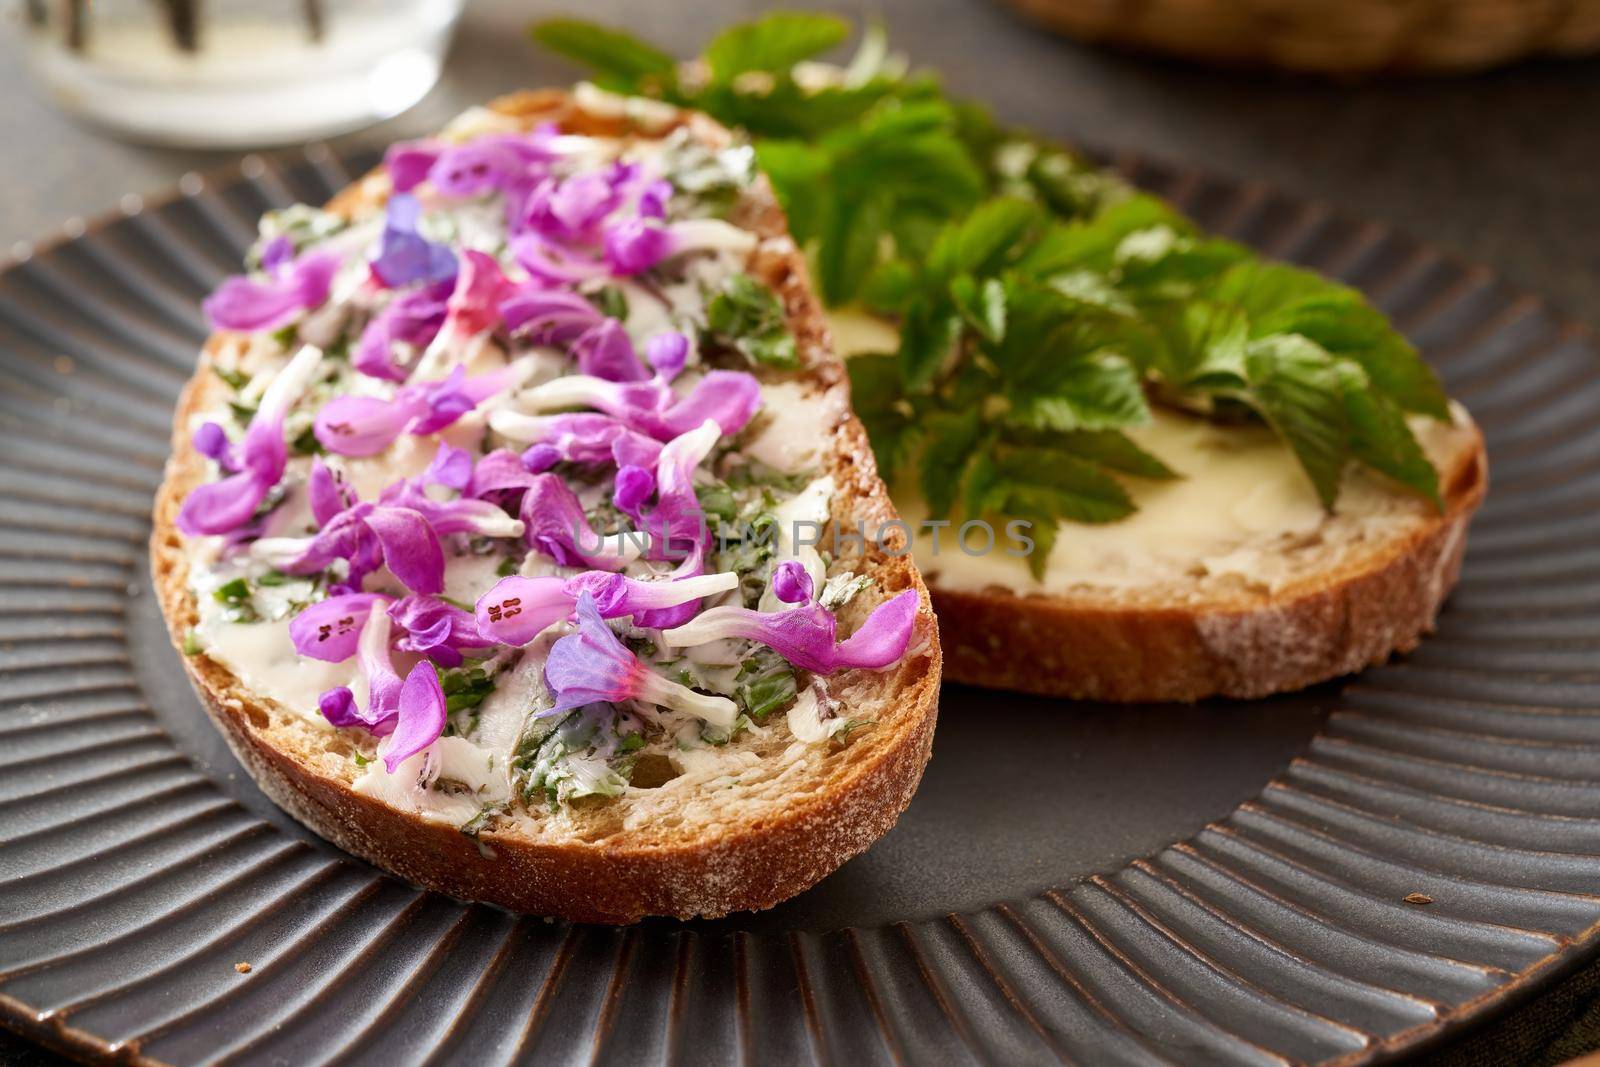 Slices of sourdough bread with wild edible spring plants - ground elder leaves, lungwort and purple dead-nettle by madeleine_steinbach